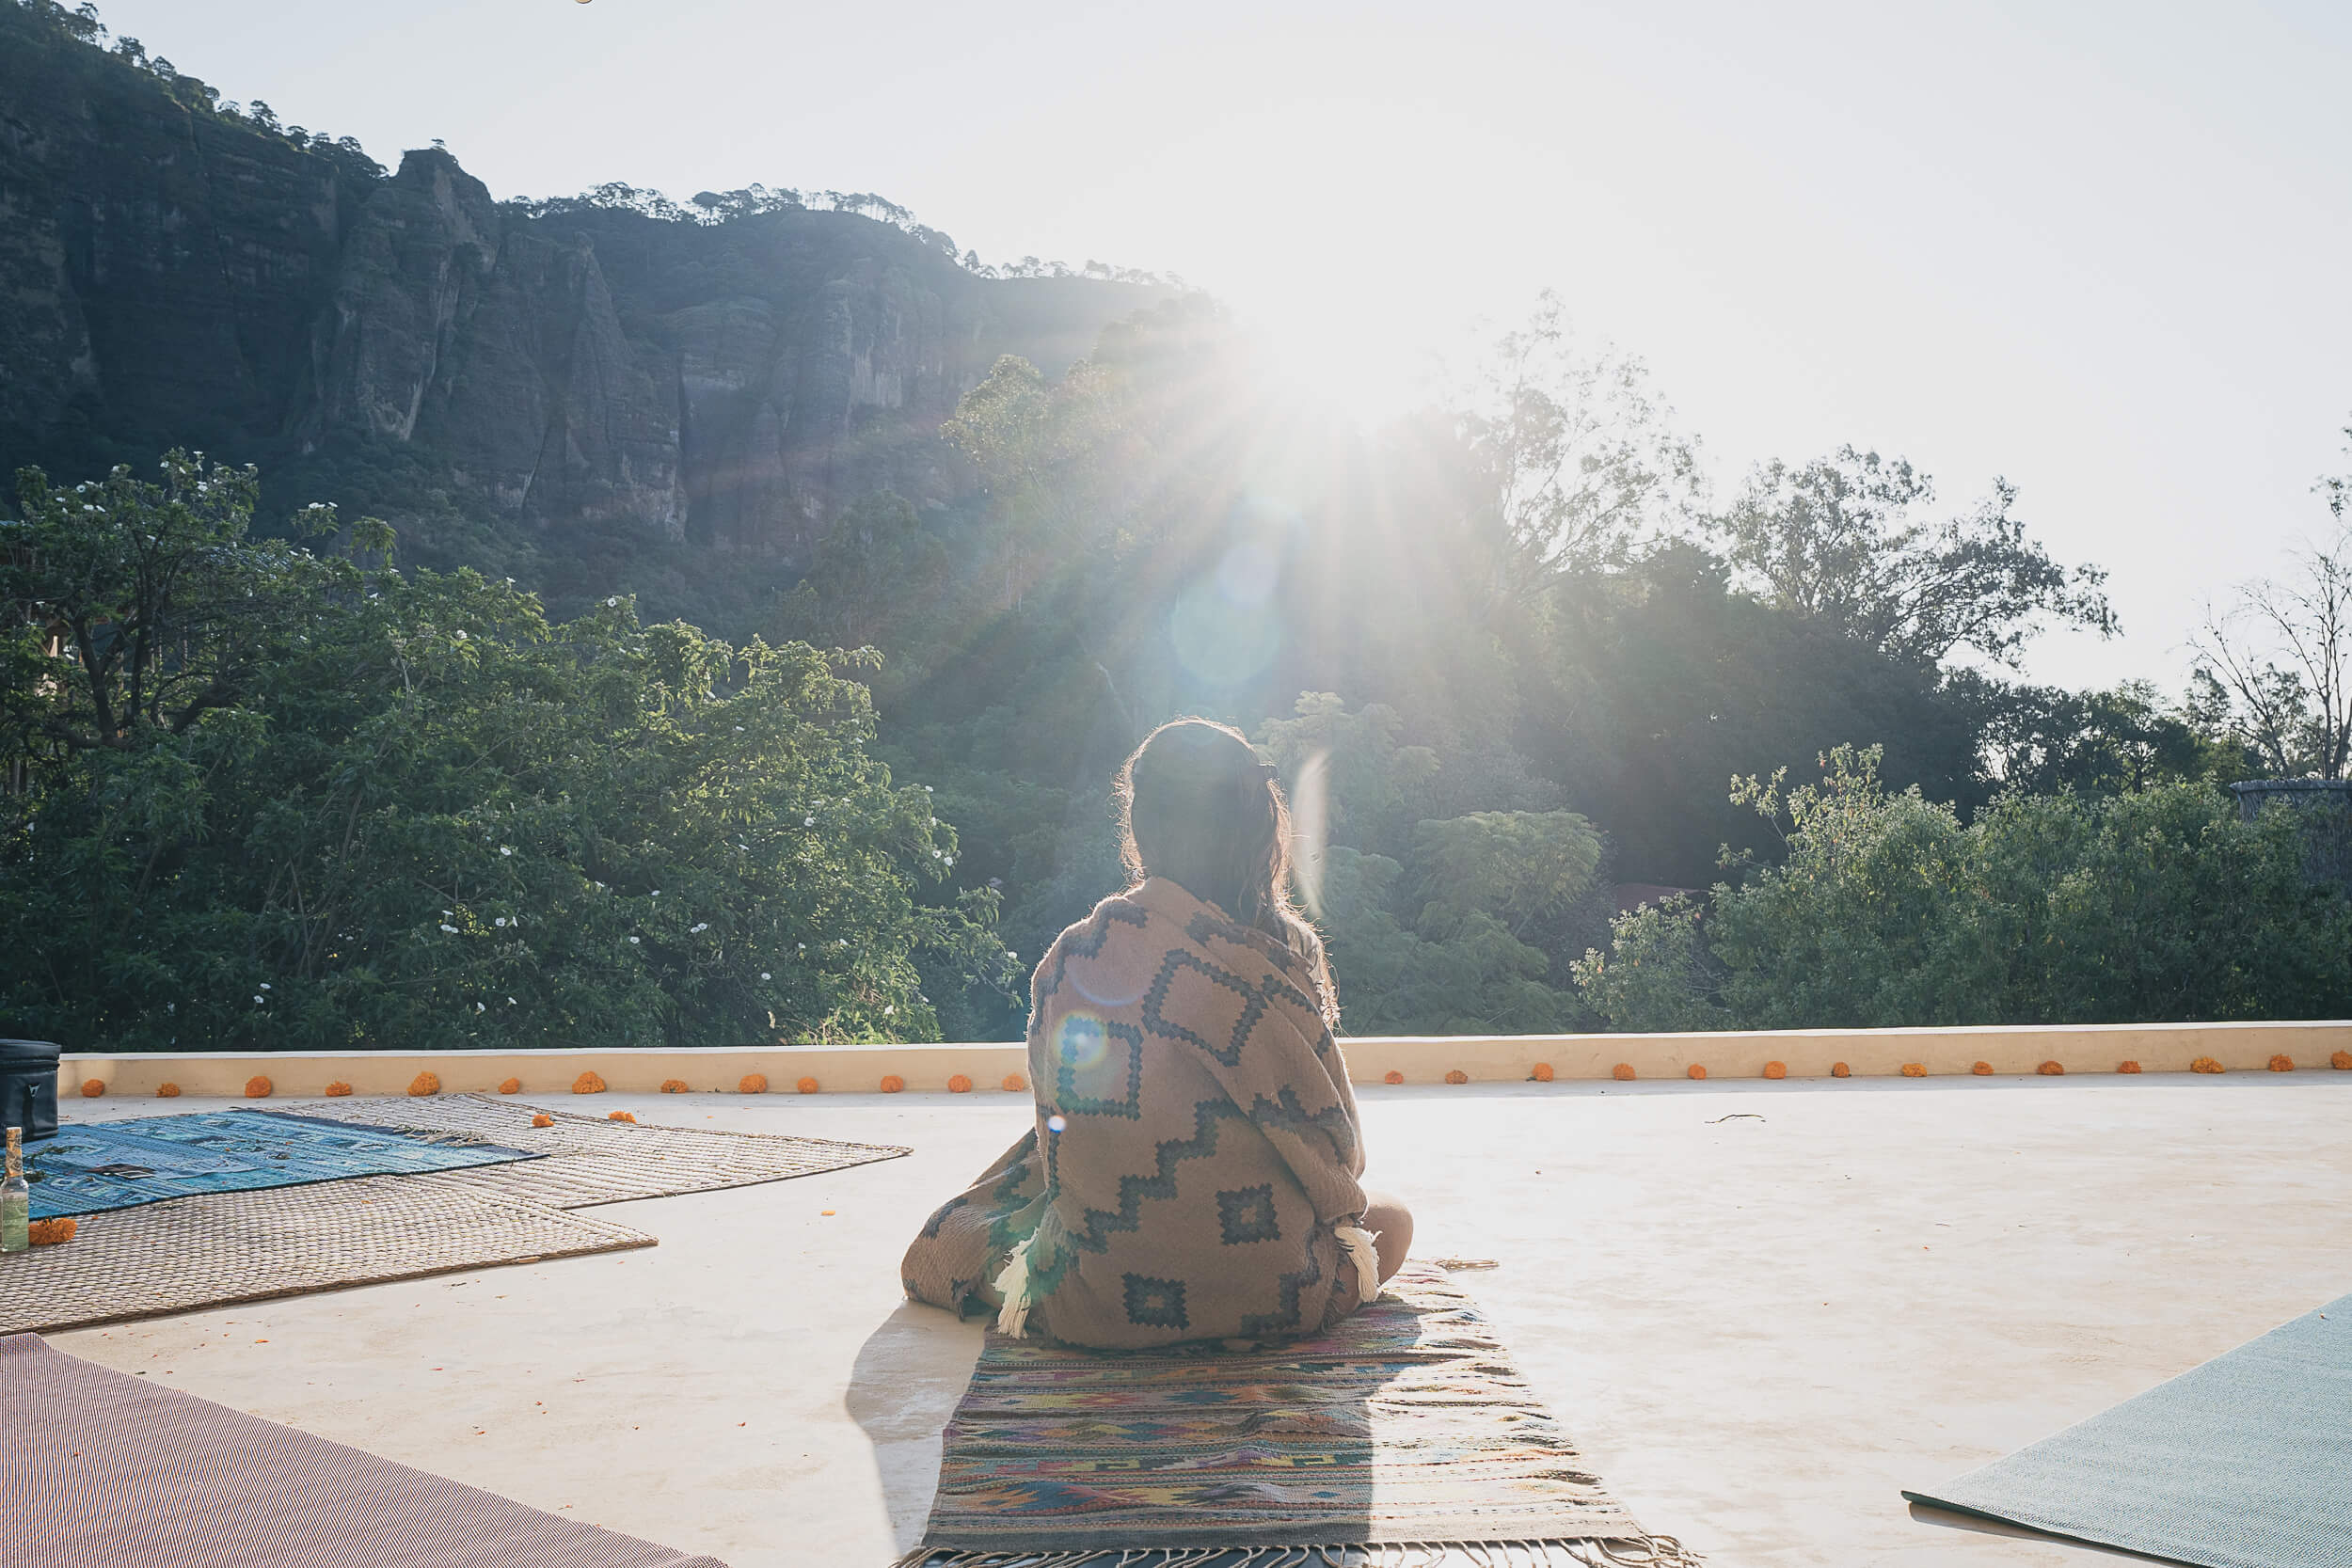 A serene morning yoga session in nature, with a participant meditating facing the sun, surrounded by majestic cliffs and lush greenery, in a photo by Matt Anthony Photography emphasizing lifestyle photography.